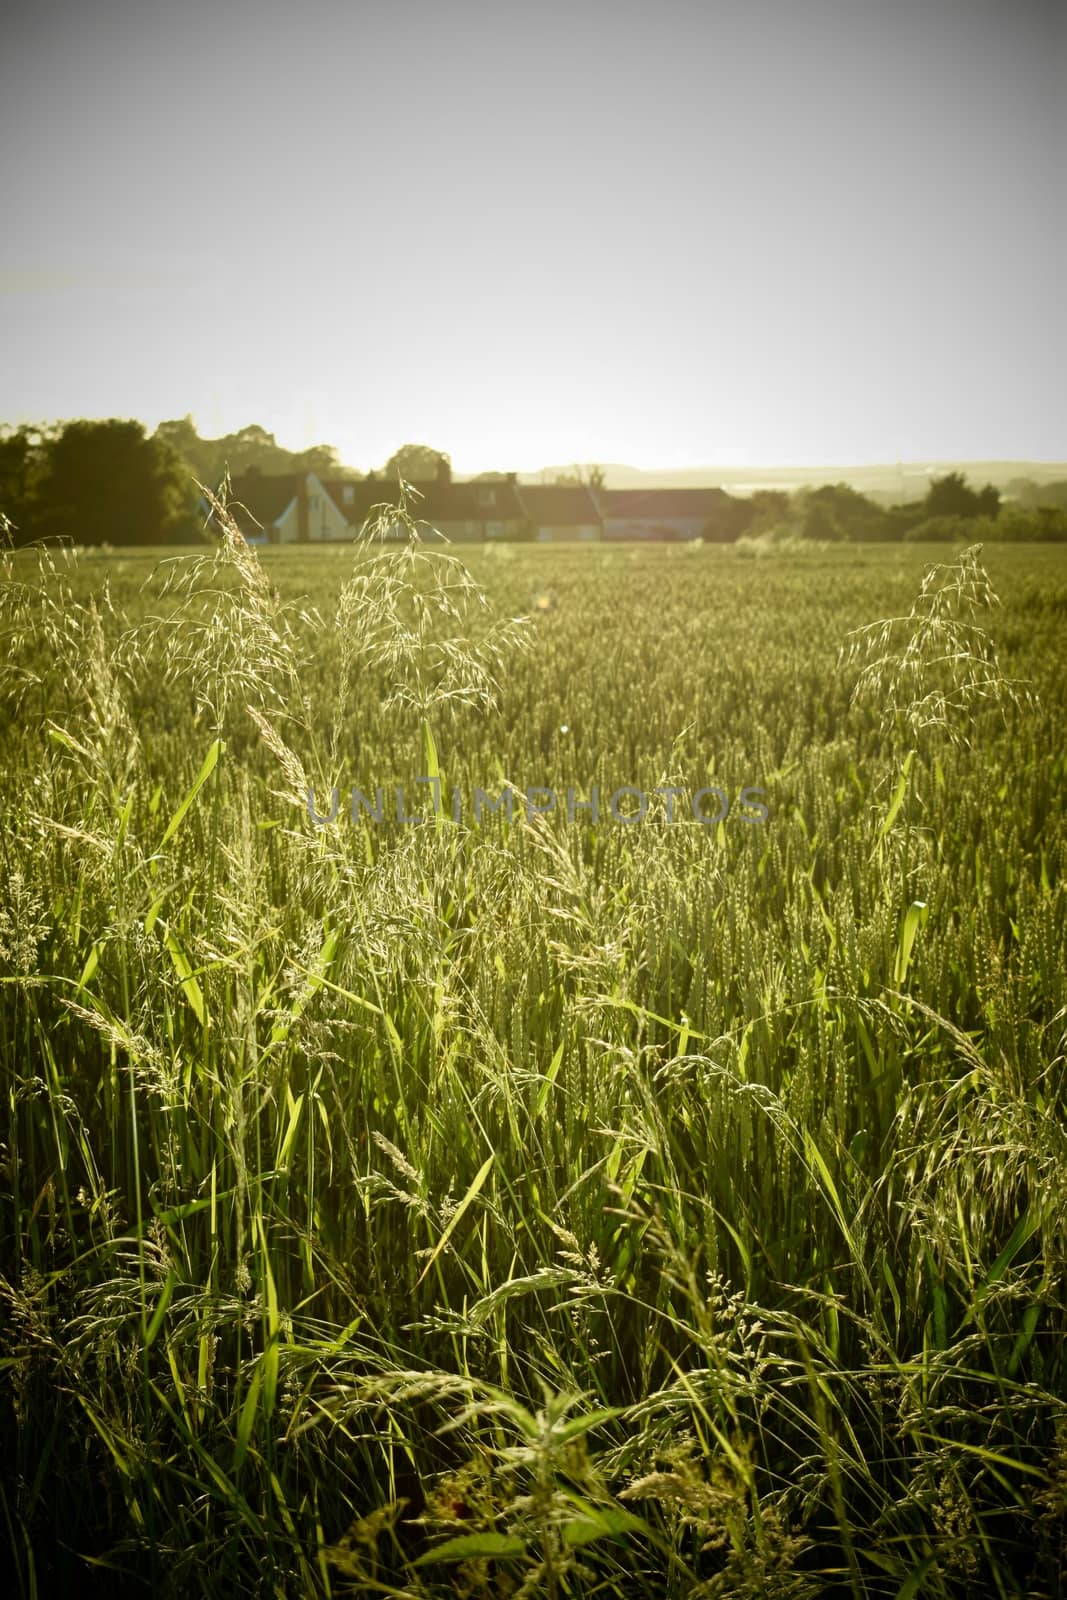 country farming scene long grass around field of corn in early evening light